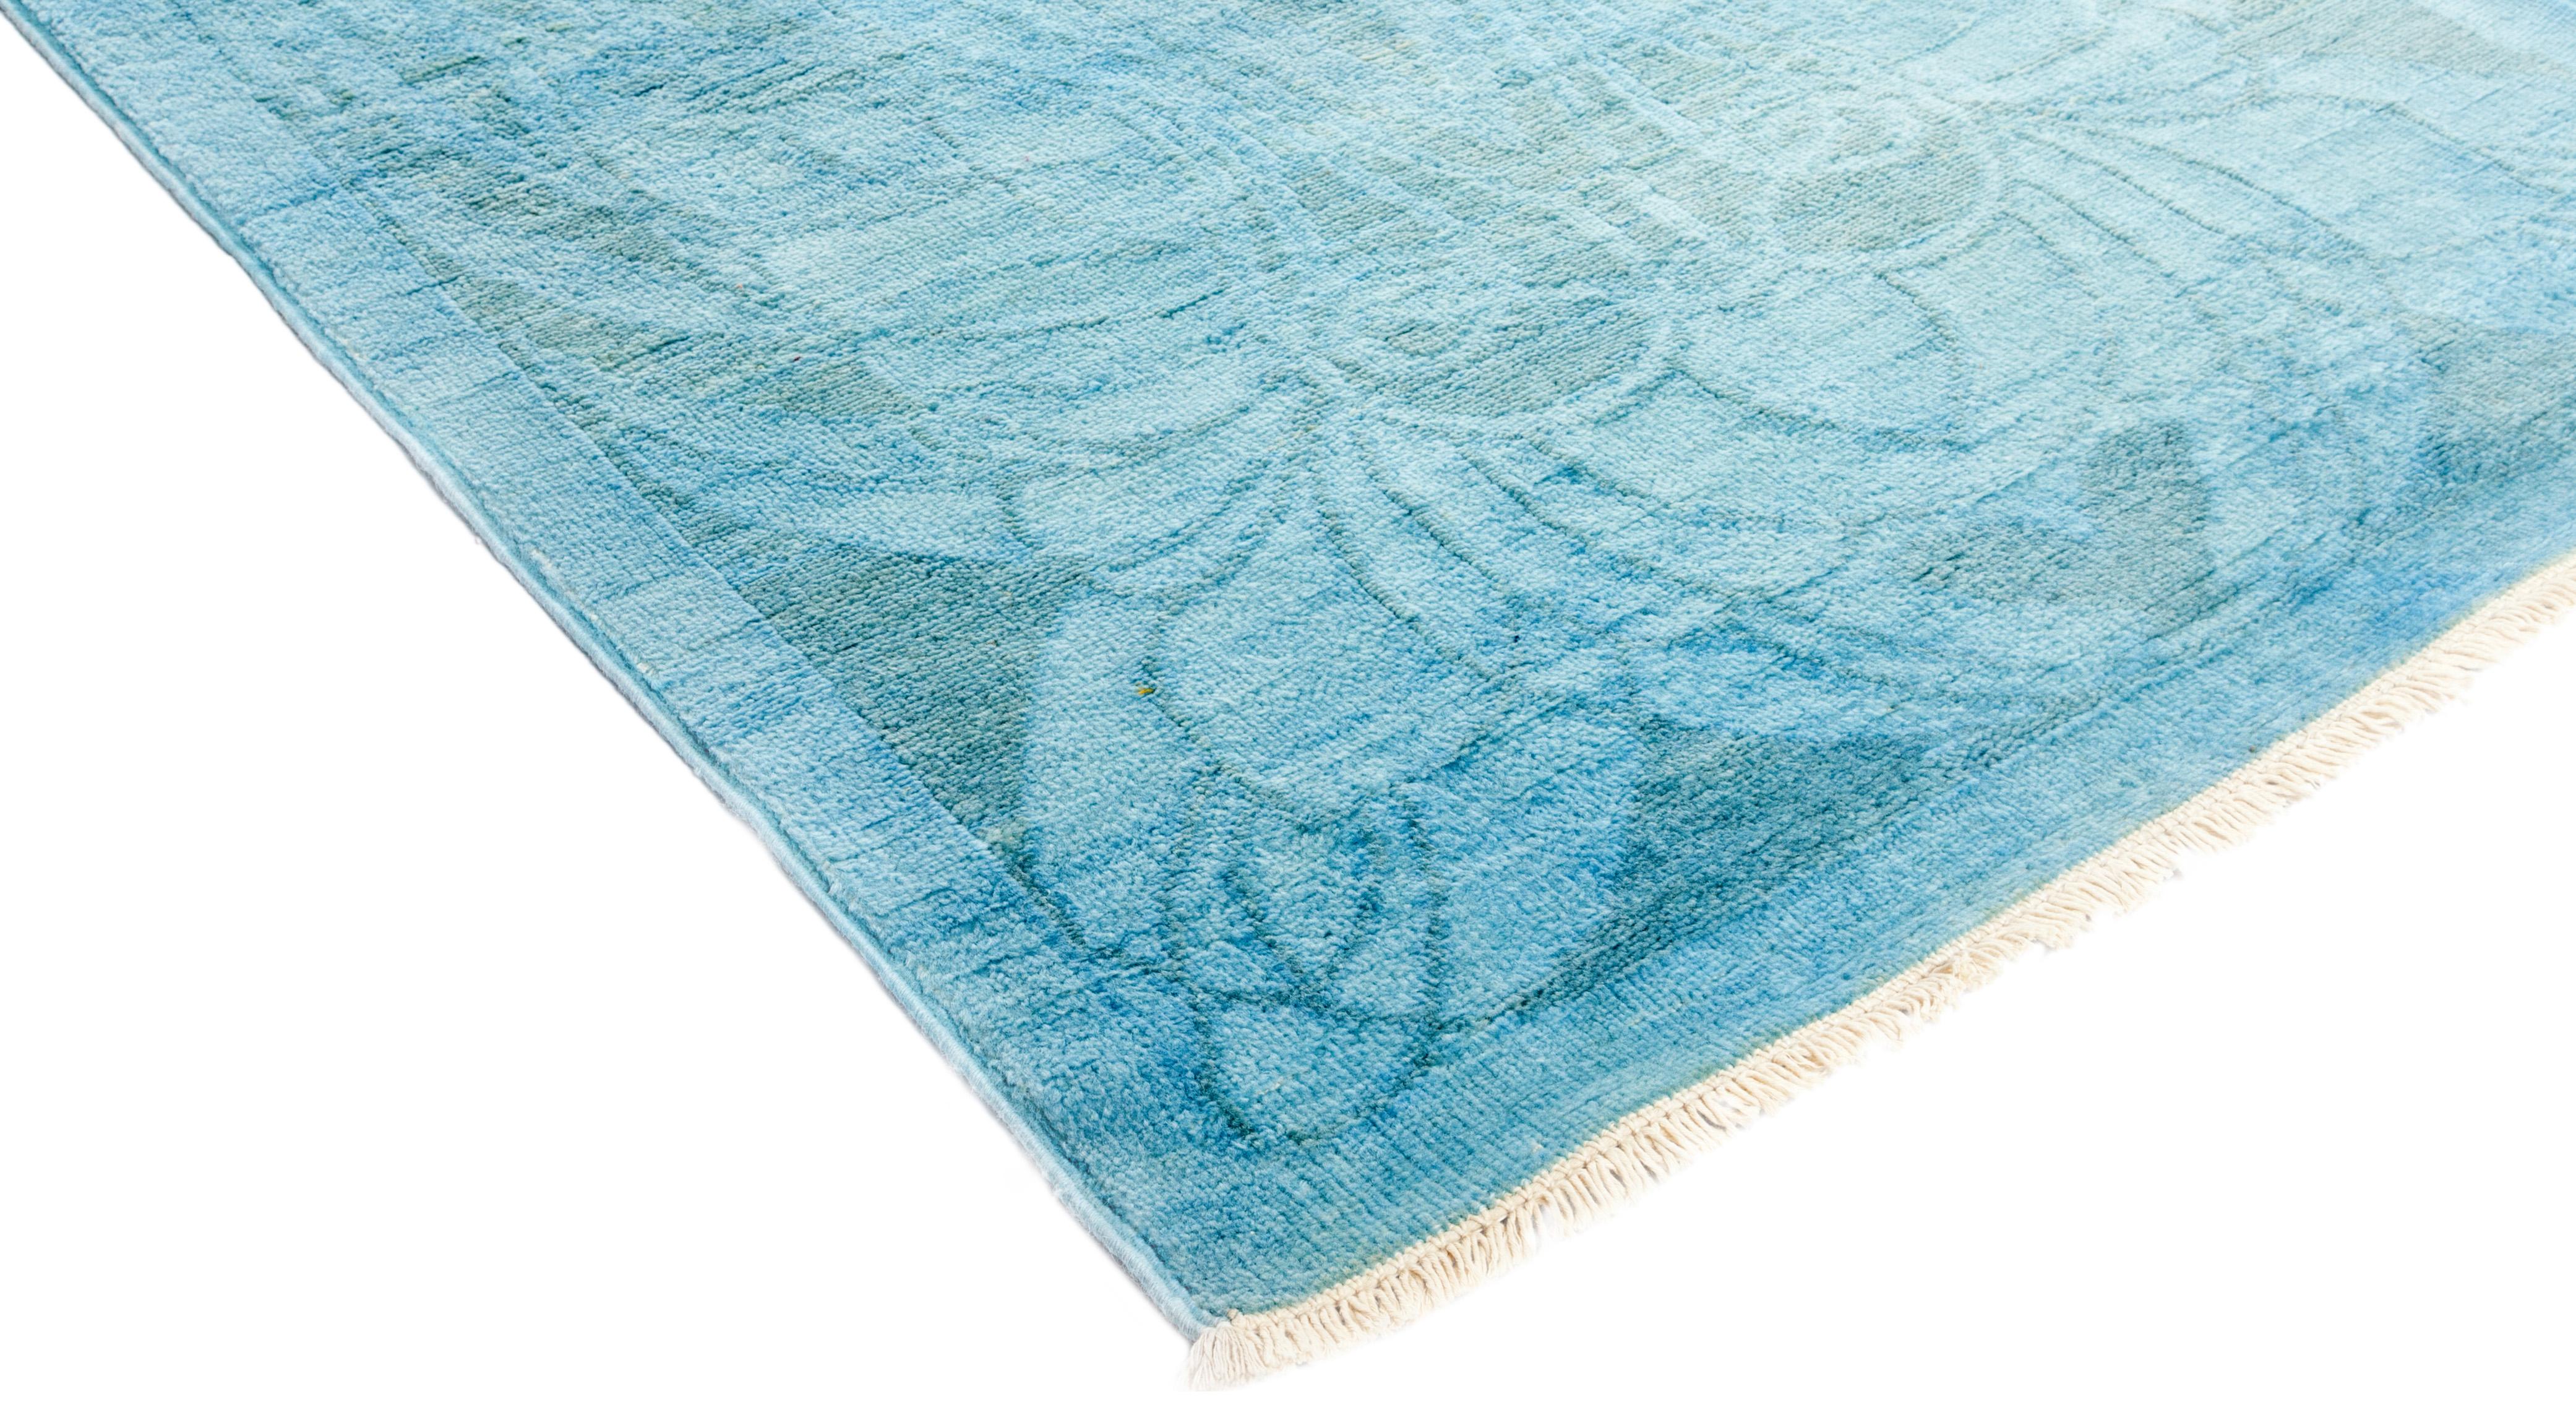 Color: Blue, made in Pakistan. 100% wool. The Colorful collection epitomizes Classic with a twist: traditional patterns overdyed in brilliant color. Each hand knotted rug is washed in a 100%-natural botanical dye that reveals hidden nuances in the